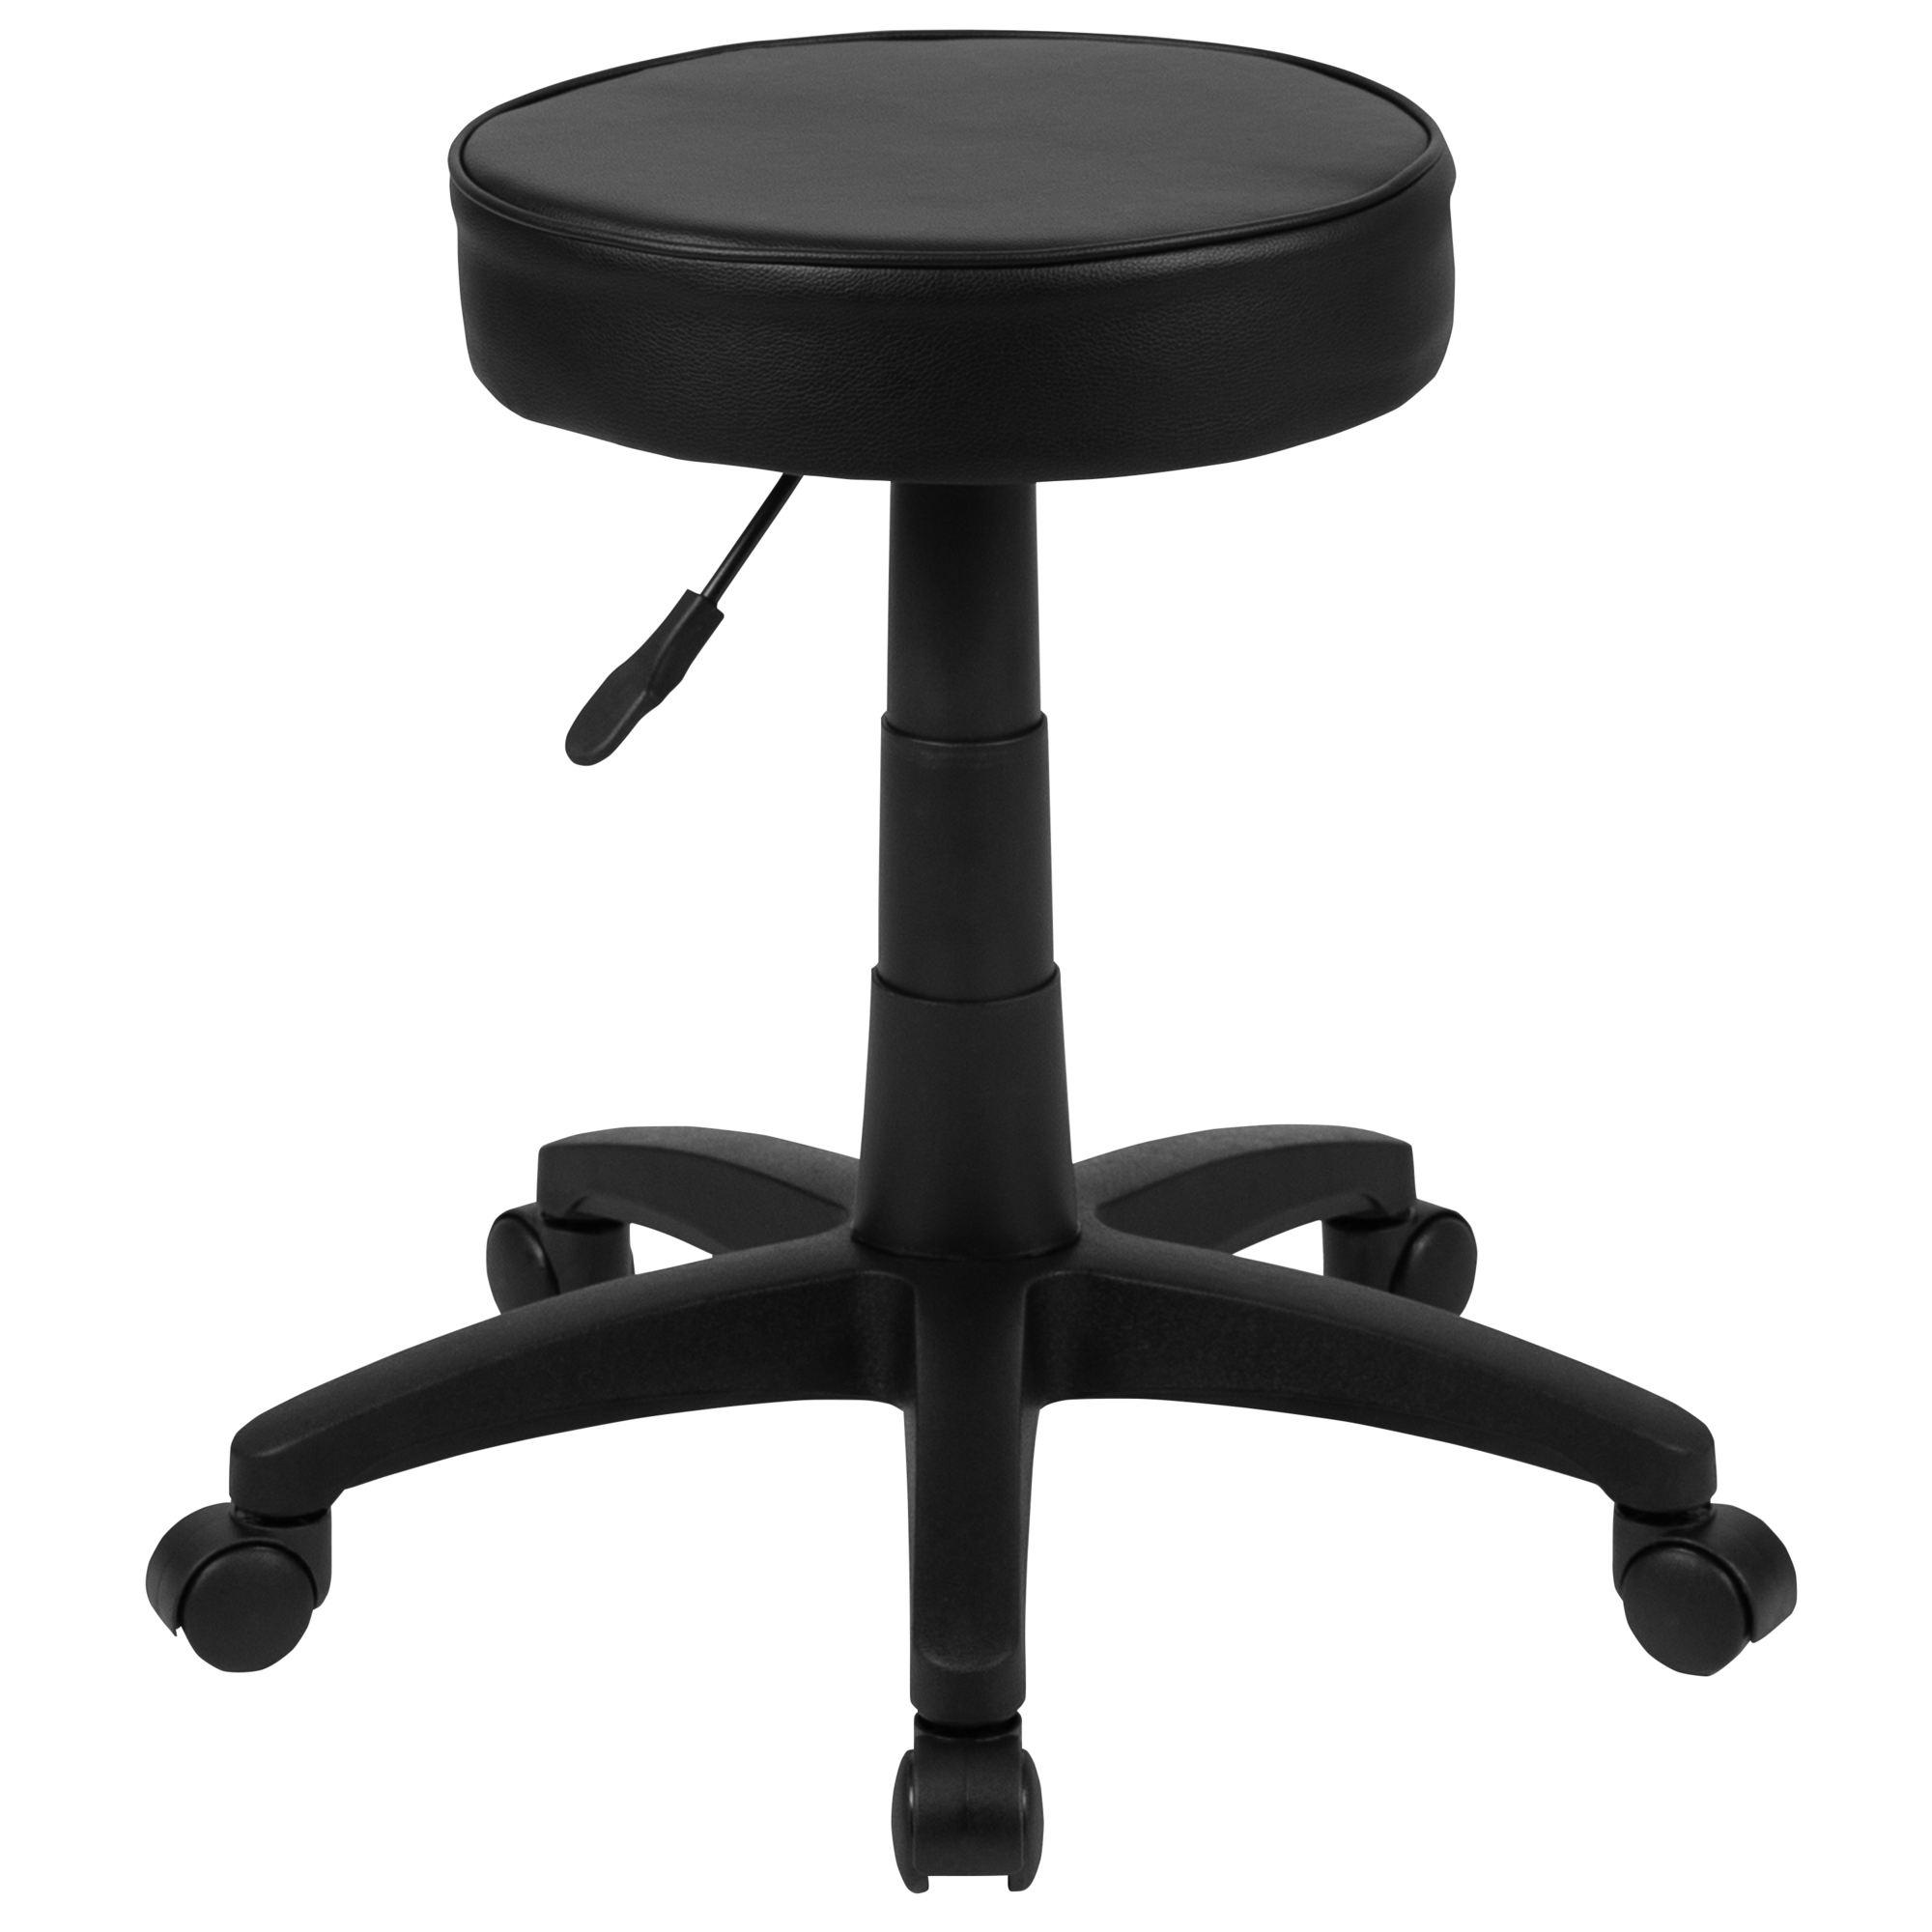 Flash Furniture, Black Ergonomic Backless Medical Stool on Wheels, Primary Color Black, Included (qty.) 1, Model CH820423X01